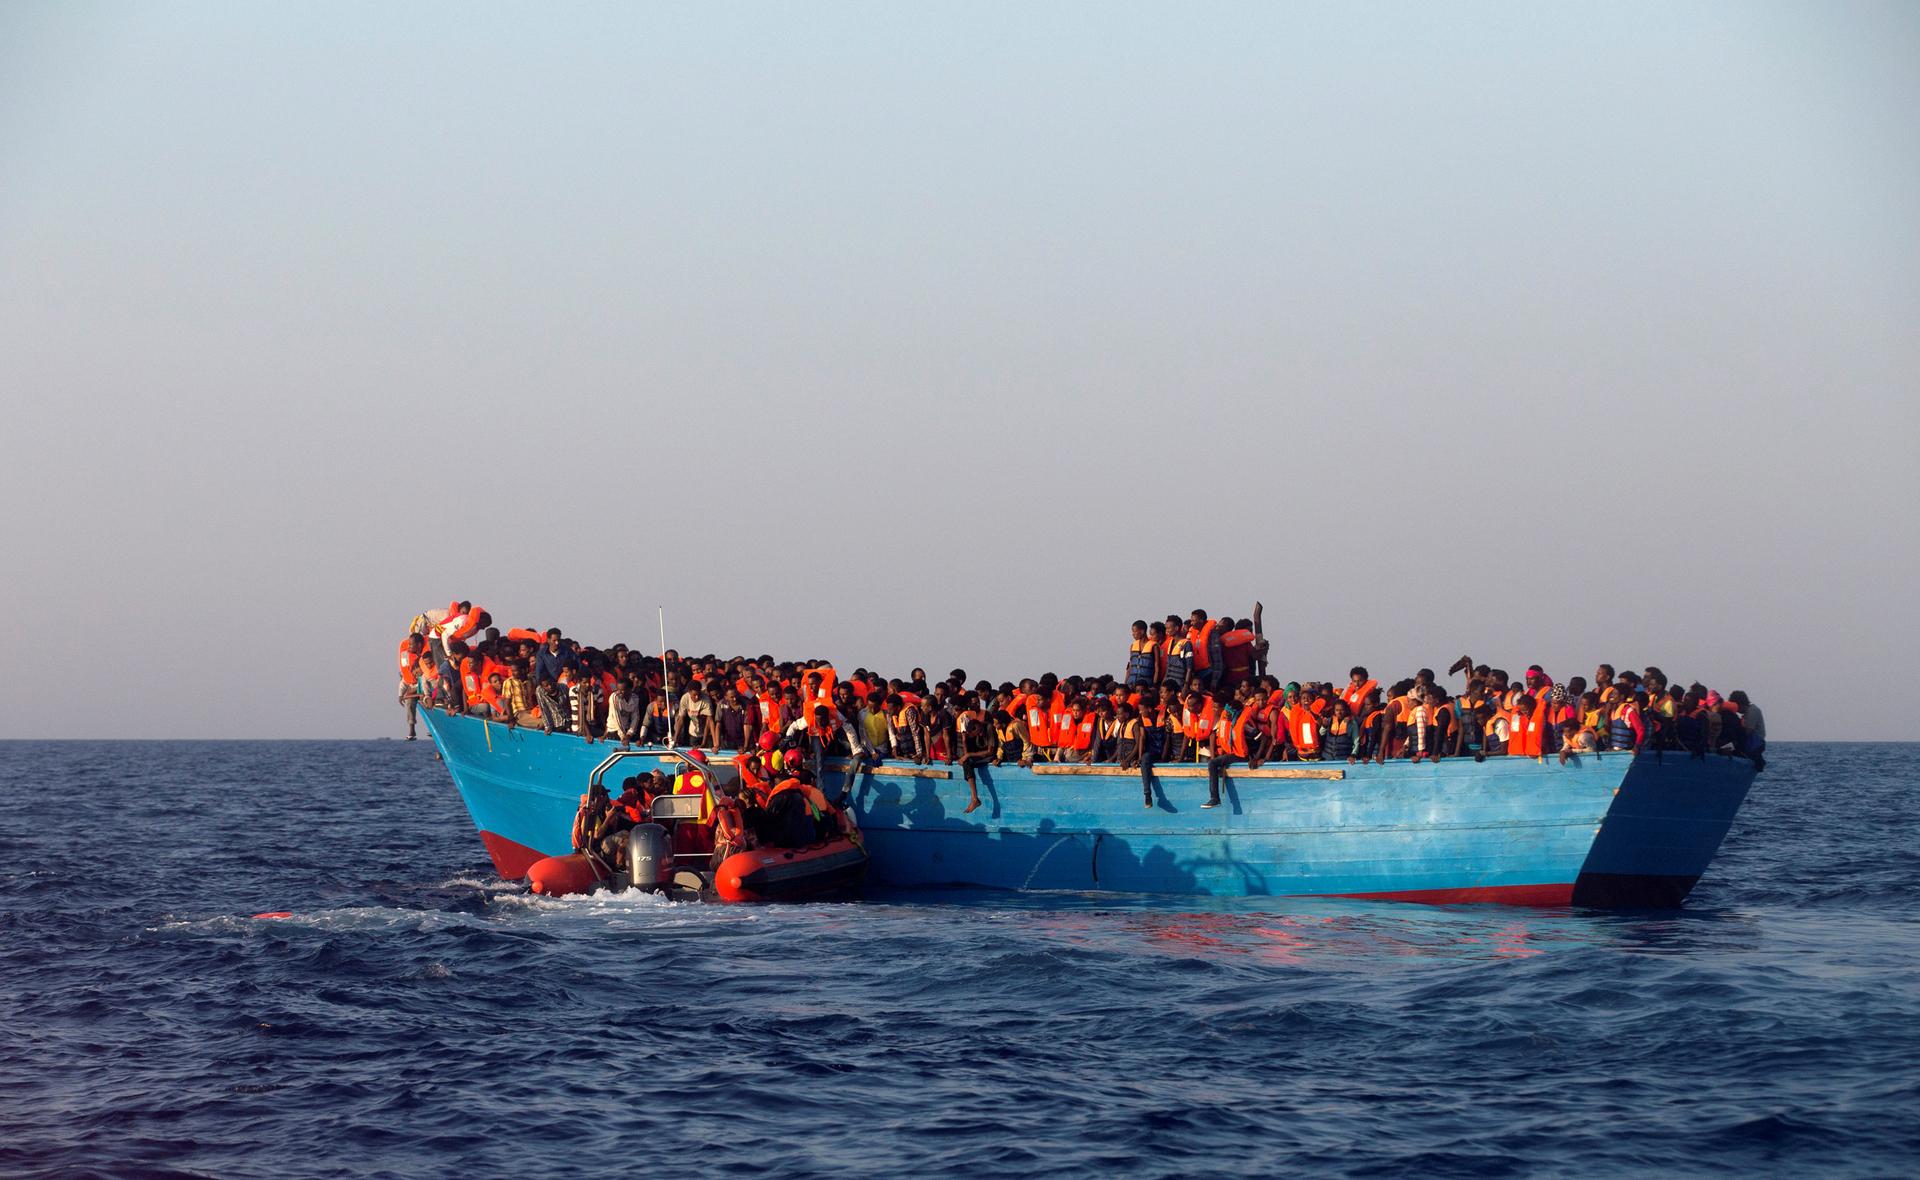 A rescue boat of the Spanish NGO Proactiva approaches an overcrowded wooden vessel with migrants from Eritrea, off the Libyan coast in Mediterranean Sea August 29, 2016. REUTERS/Giorgos Moutafis